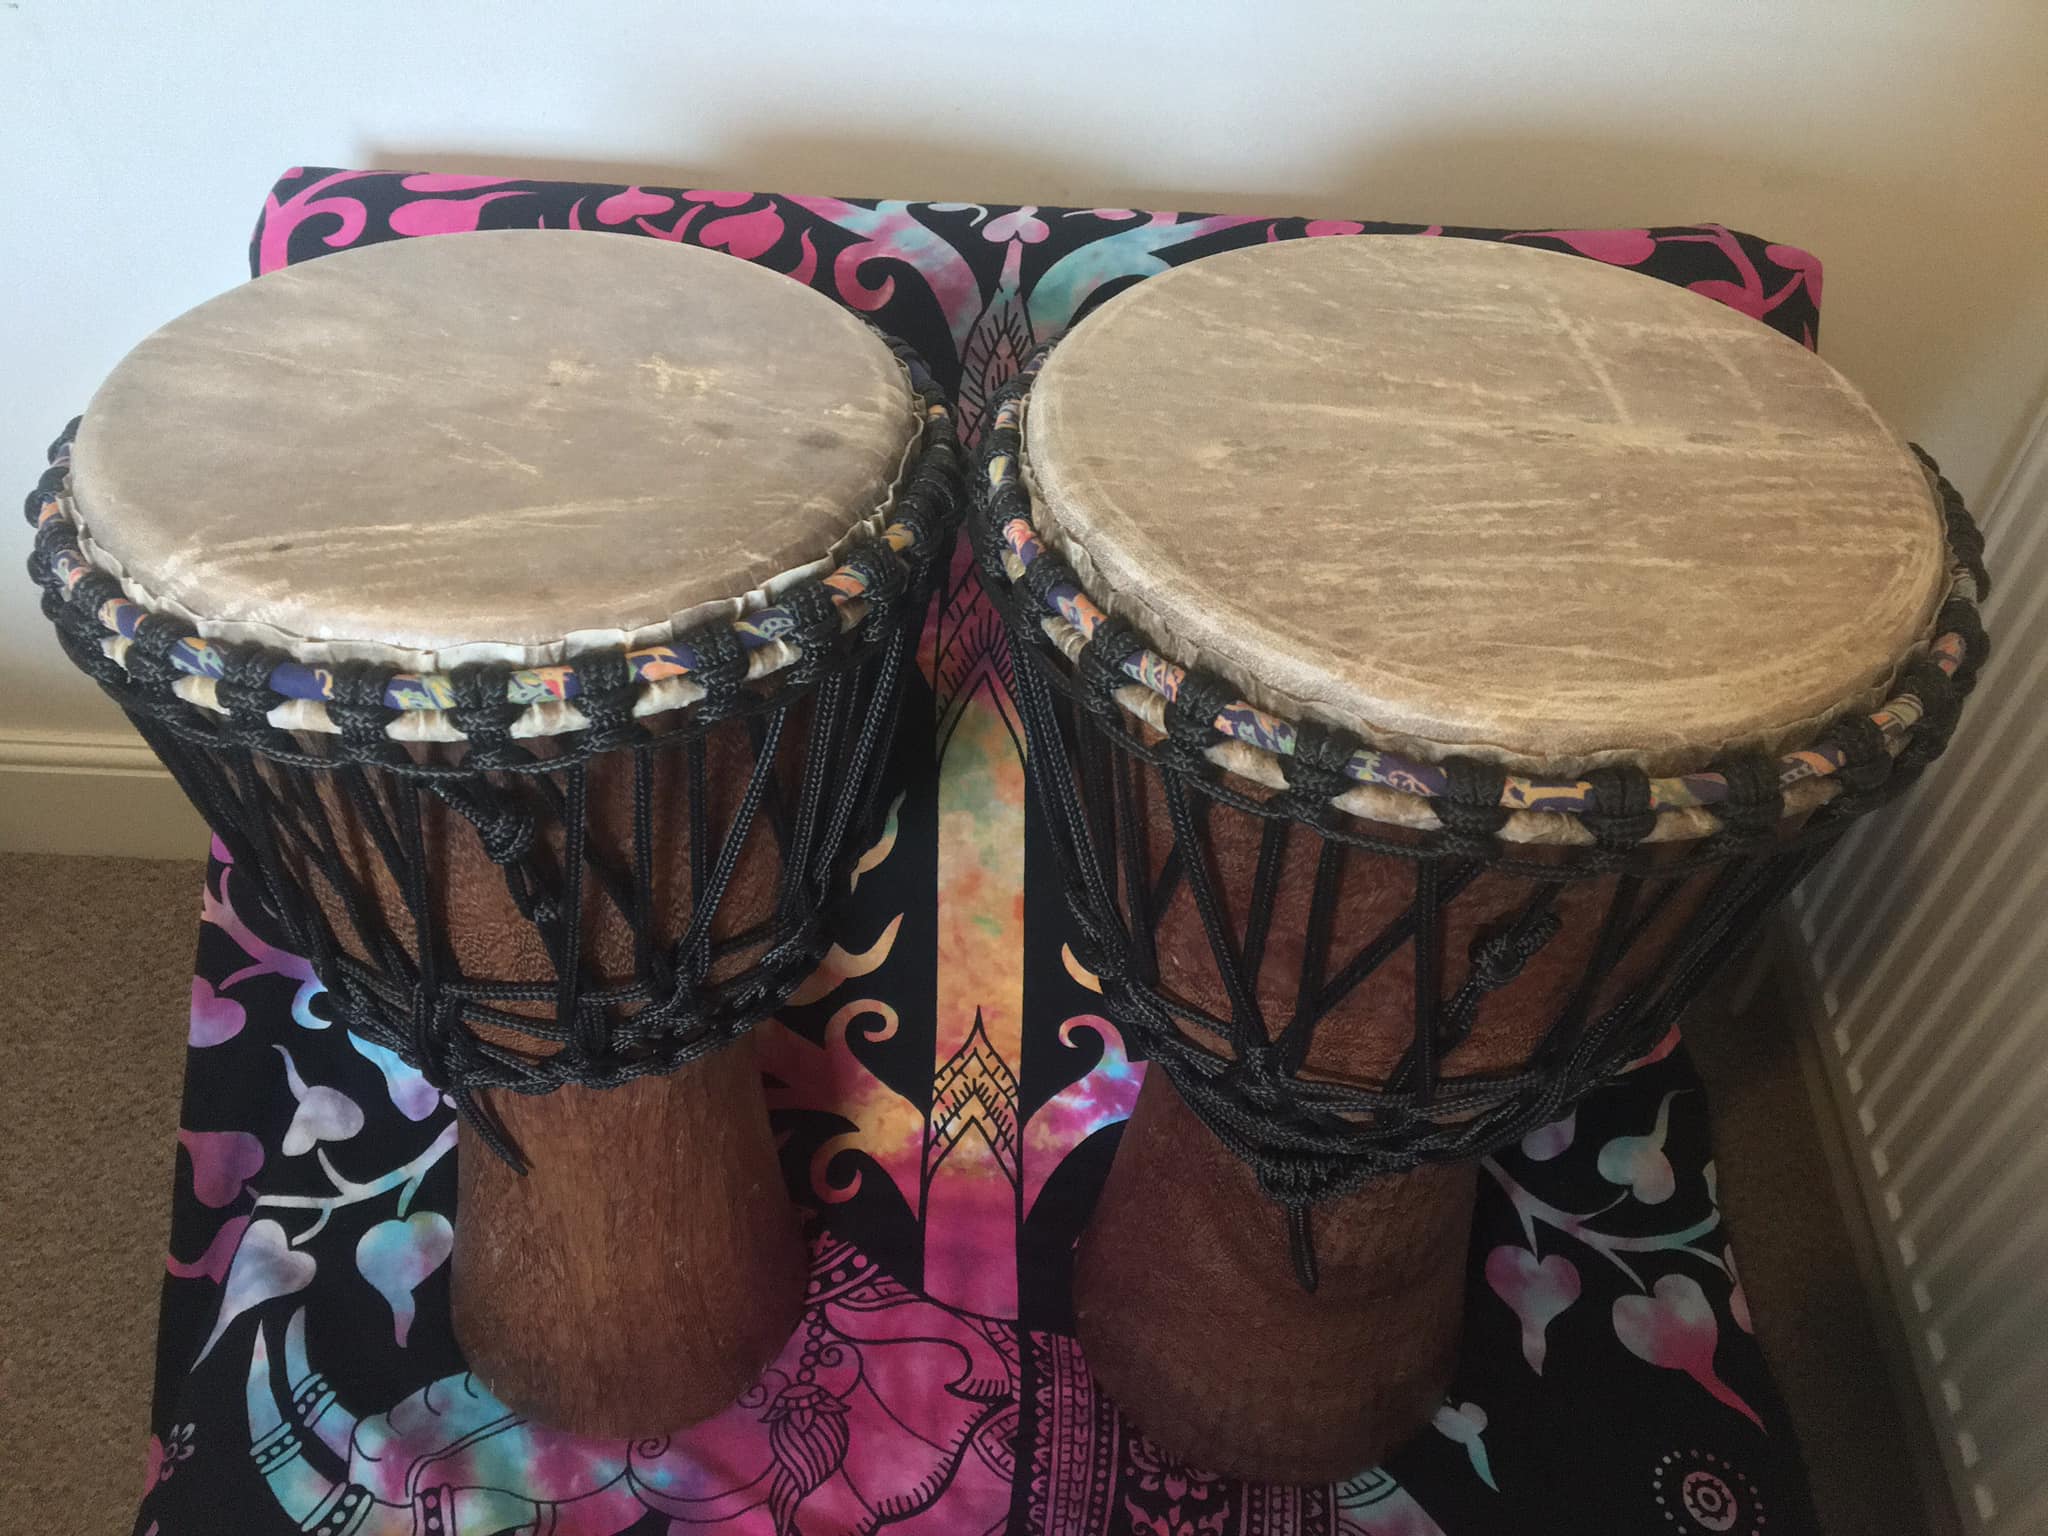 Two Africa drums after being rebuilt